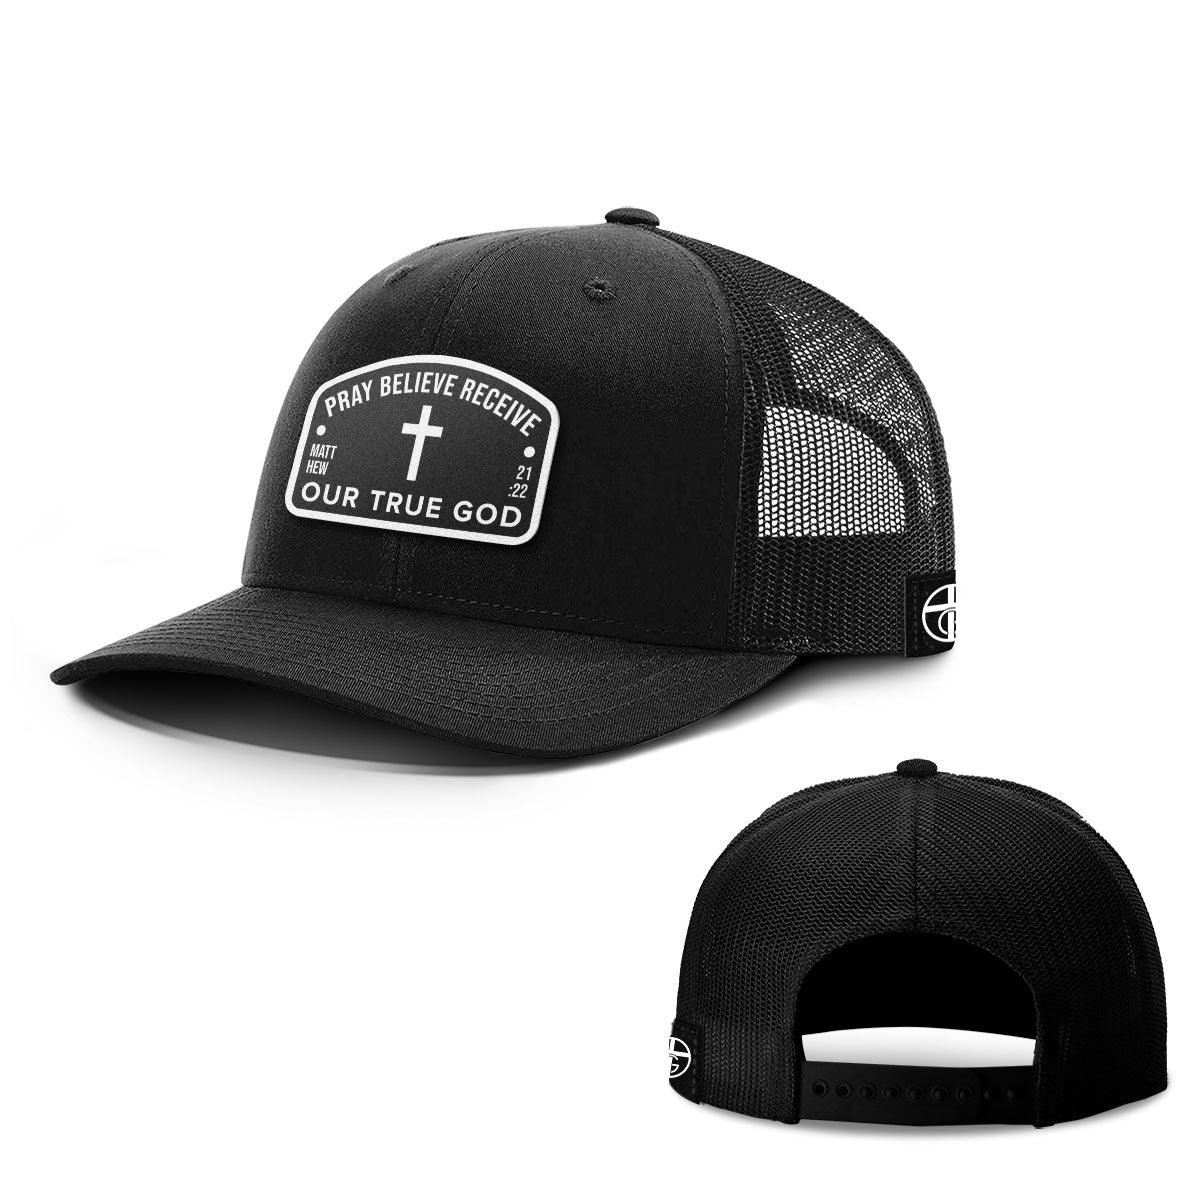 Pray Believe Receive Patch Hats - Our True God